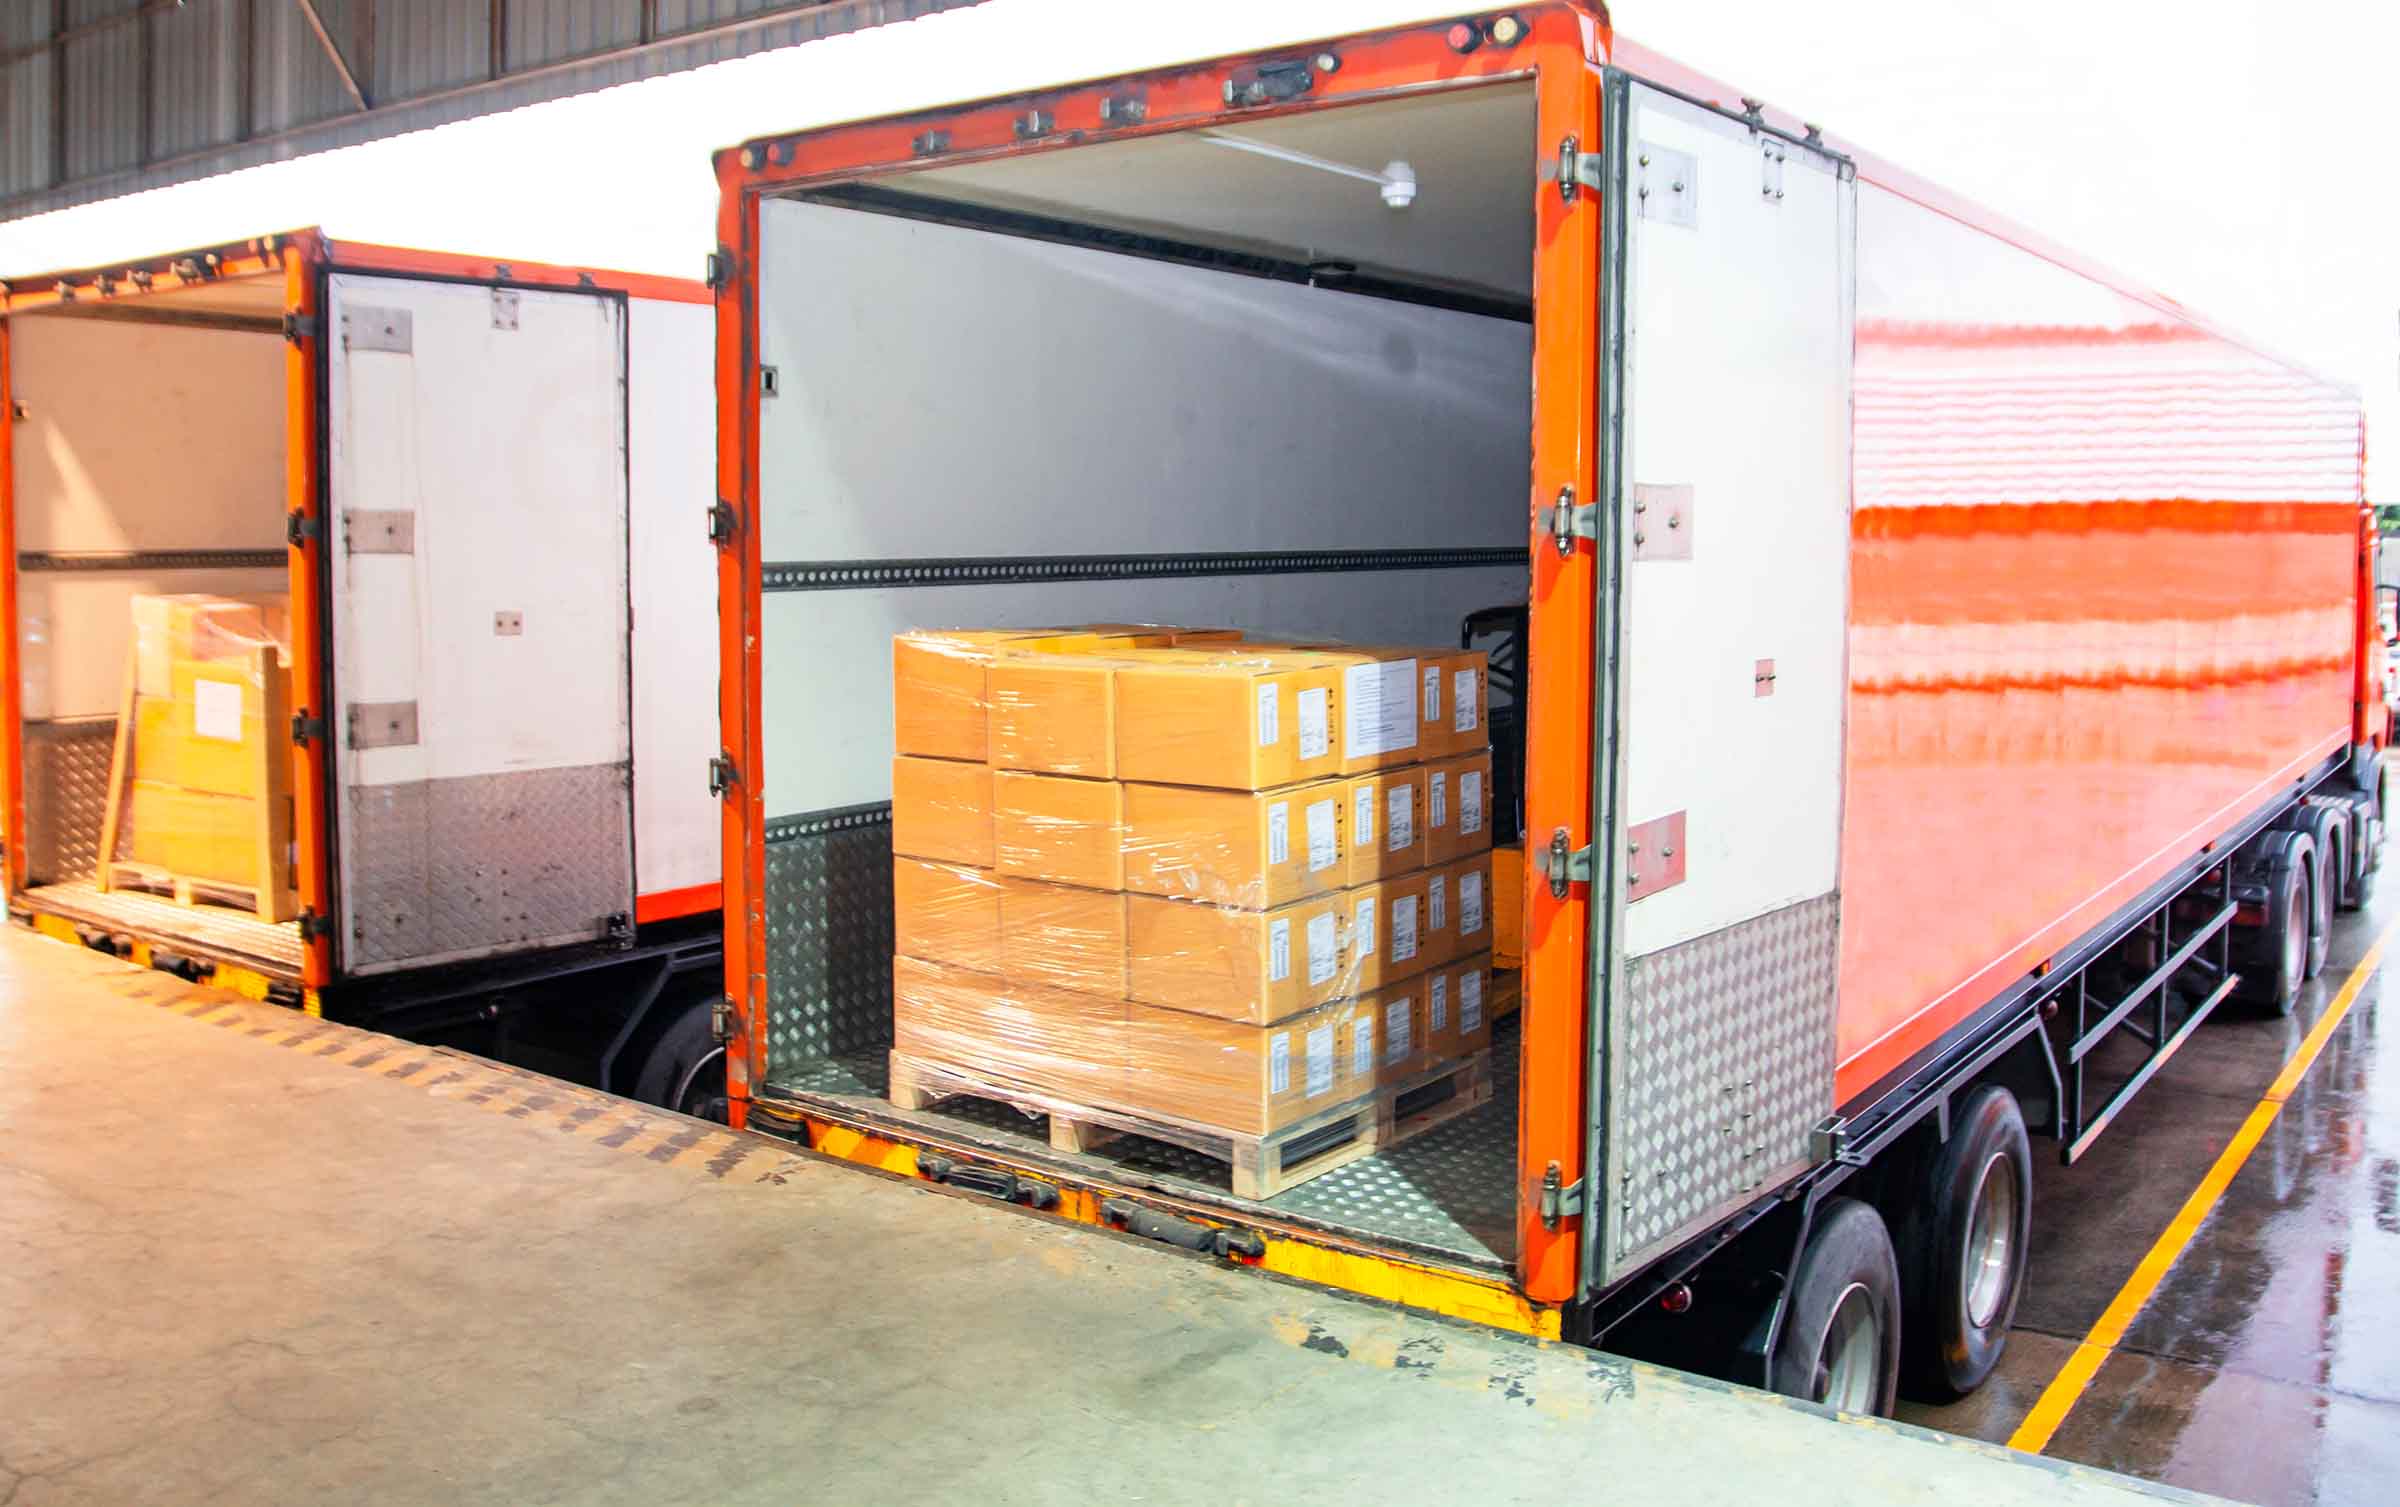 Cargo freight truck. Shipment, Delivery service. Logistics and transportation. Warehouse dock load pallet goods into shipping container truck. Stacked package boxes on pallet inside a truck.